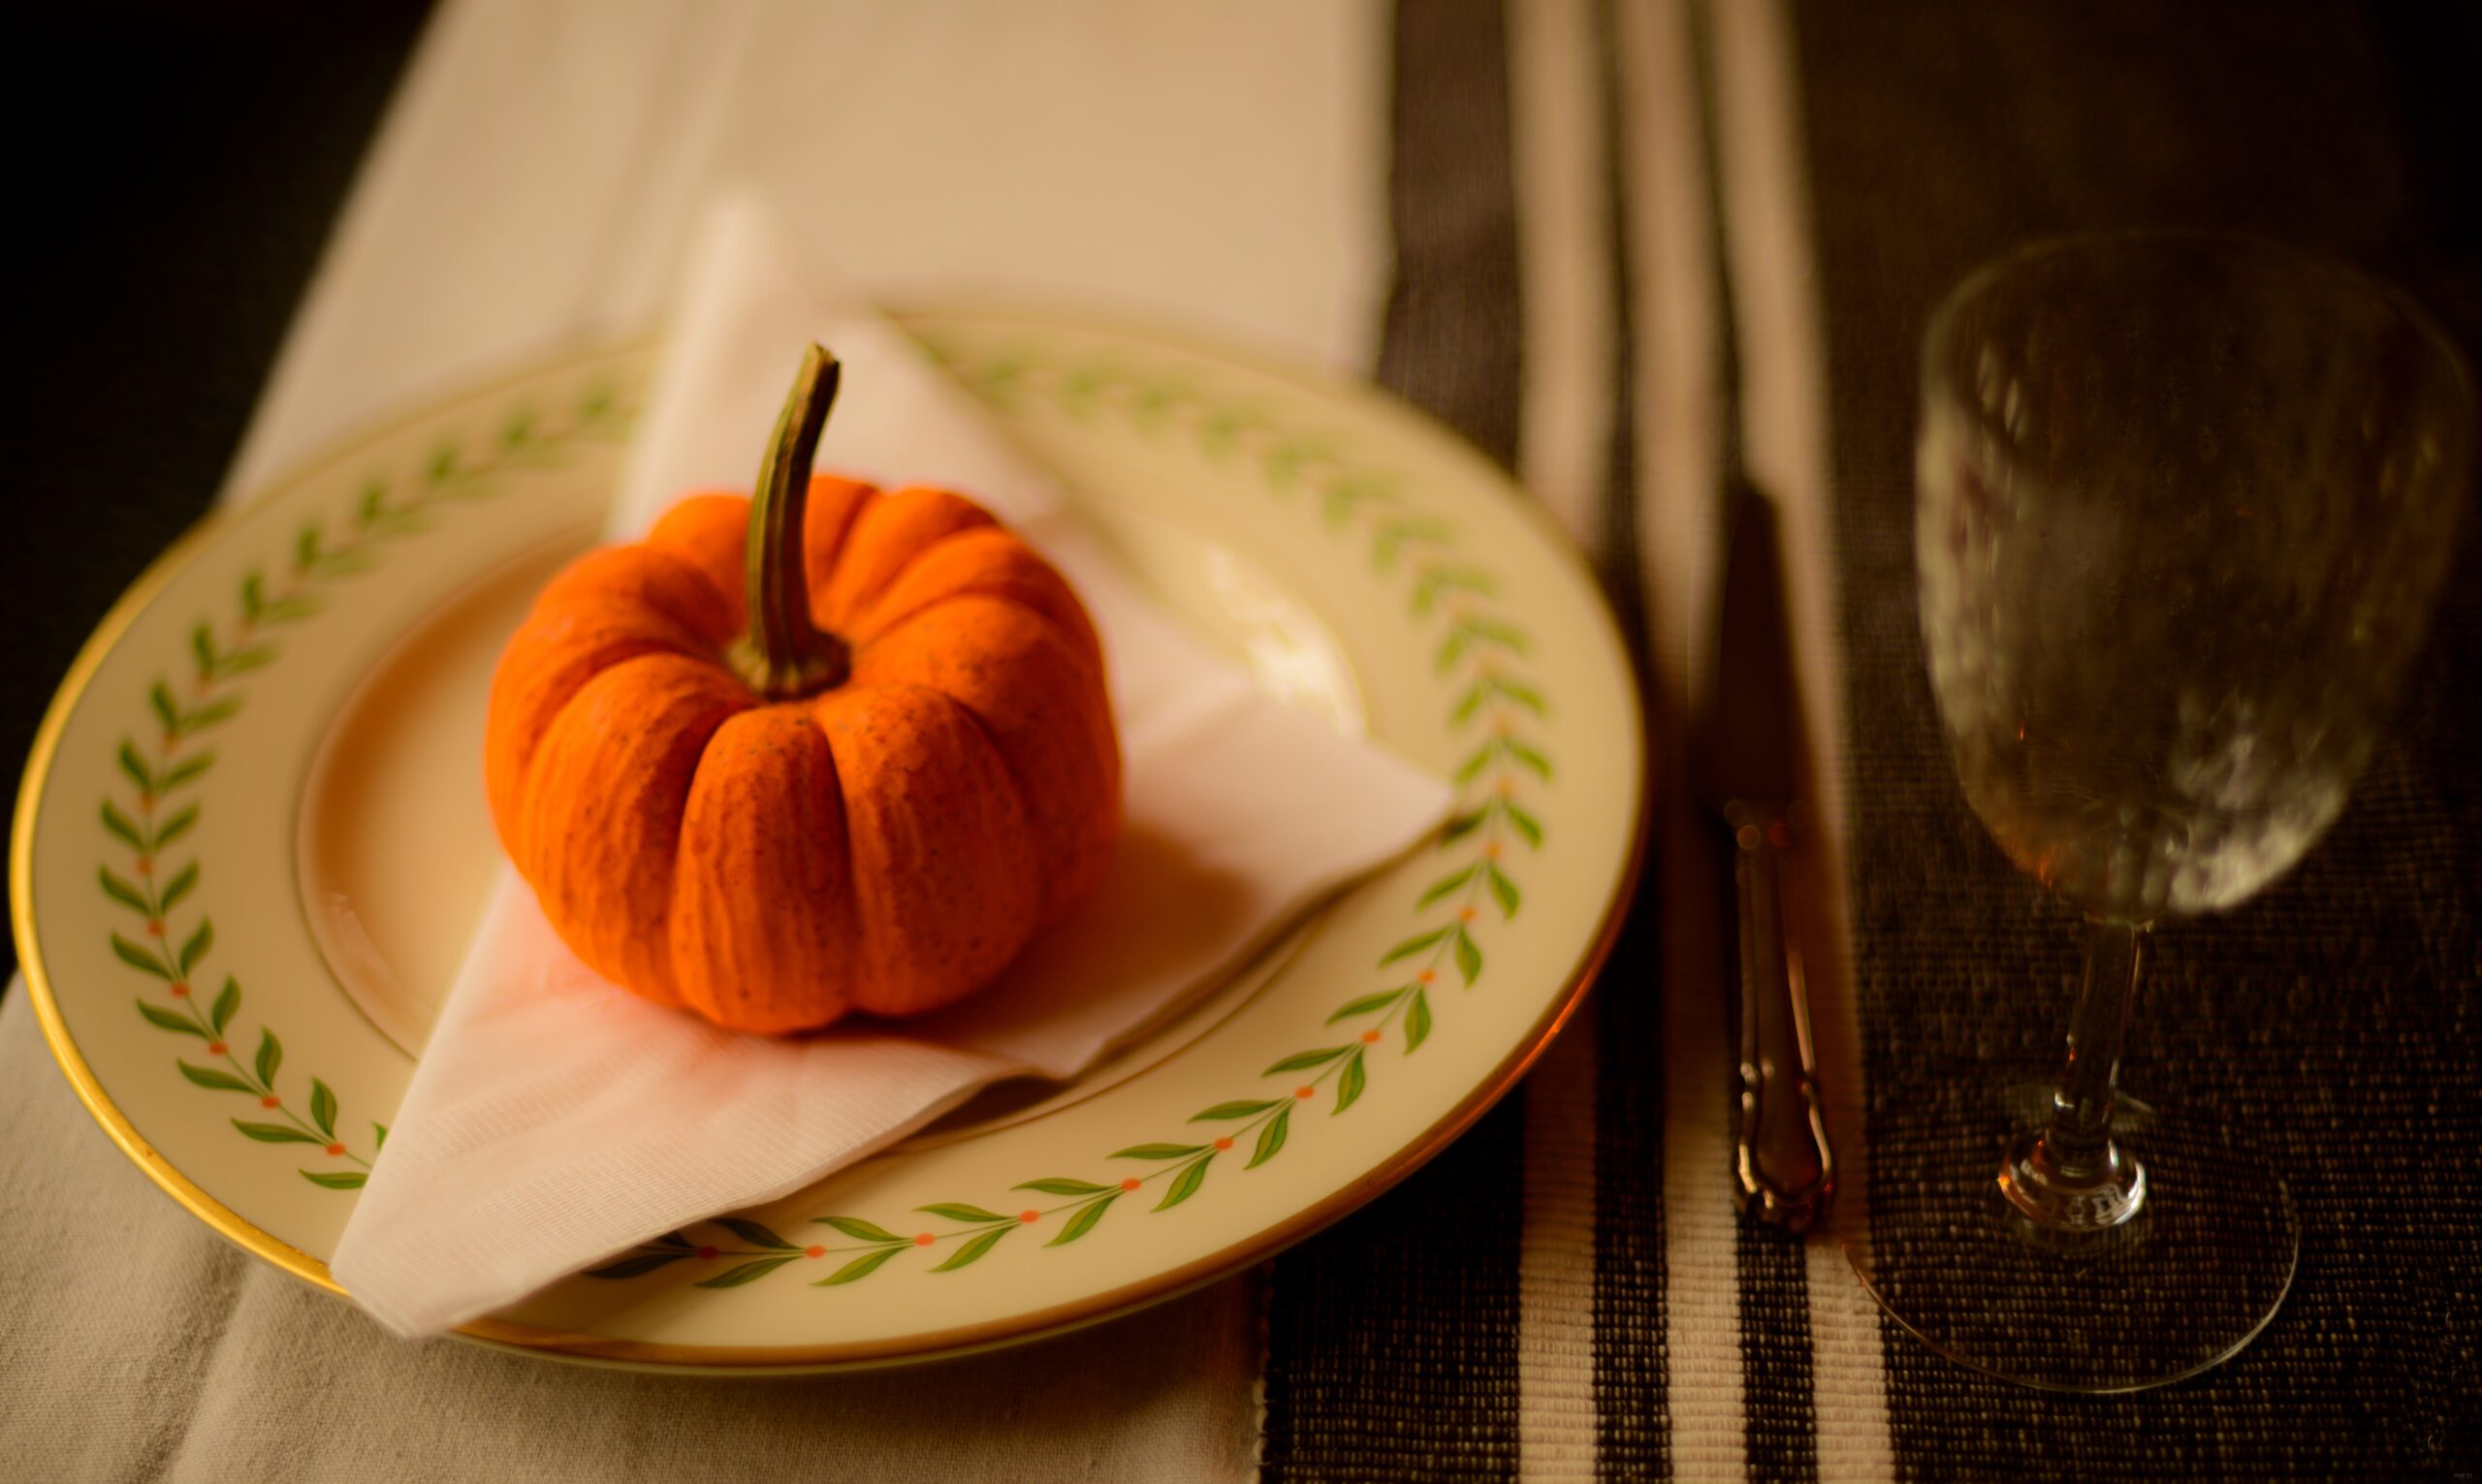 Decorate your home for friendsgiving using the tablescape idea and Thanksgiving decor and colors. Pictured: A Thanksgiving themed tablescape with pumpkin decor.